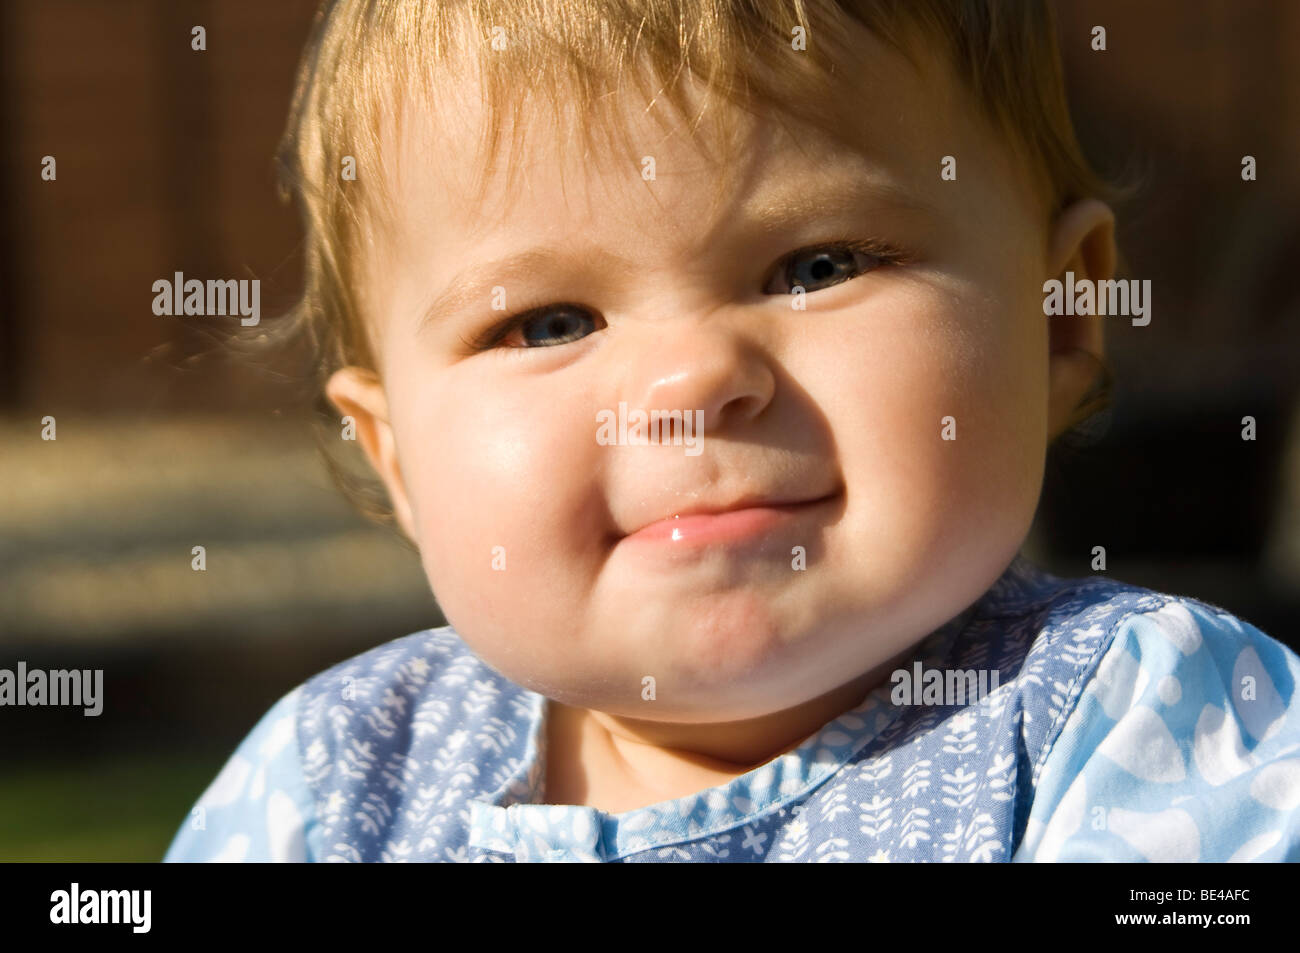 Horizontal close up portrait of a baby girl pulling funny faces and blowing raspberries in the sunshine. Stock Photo